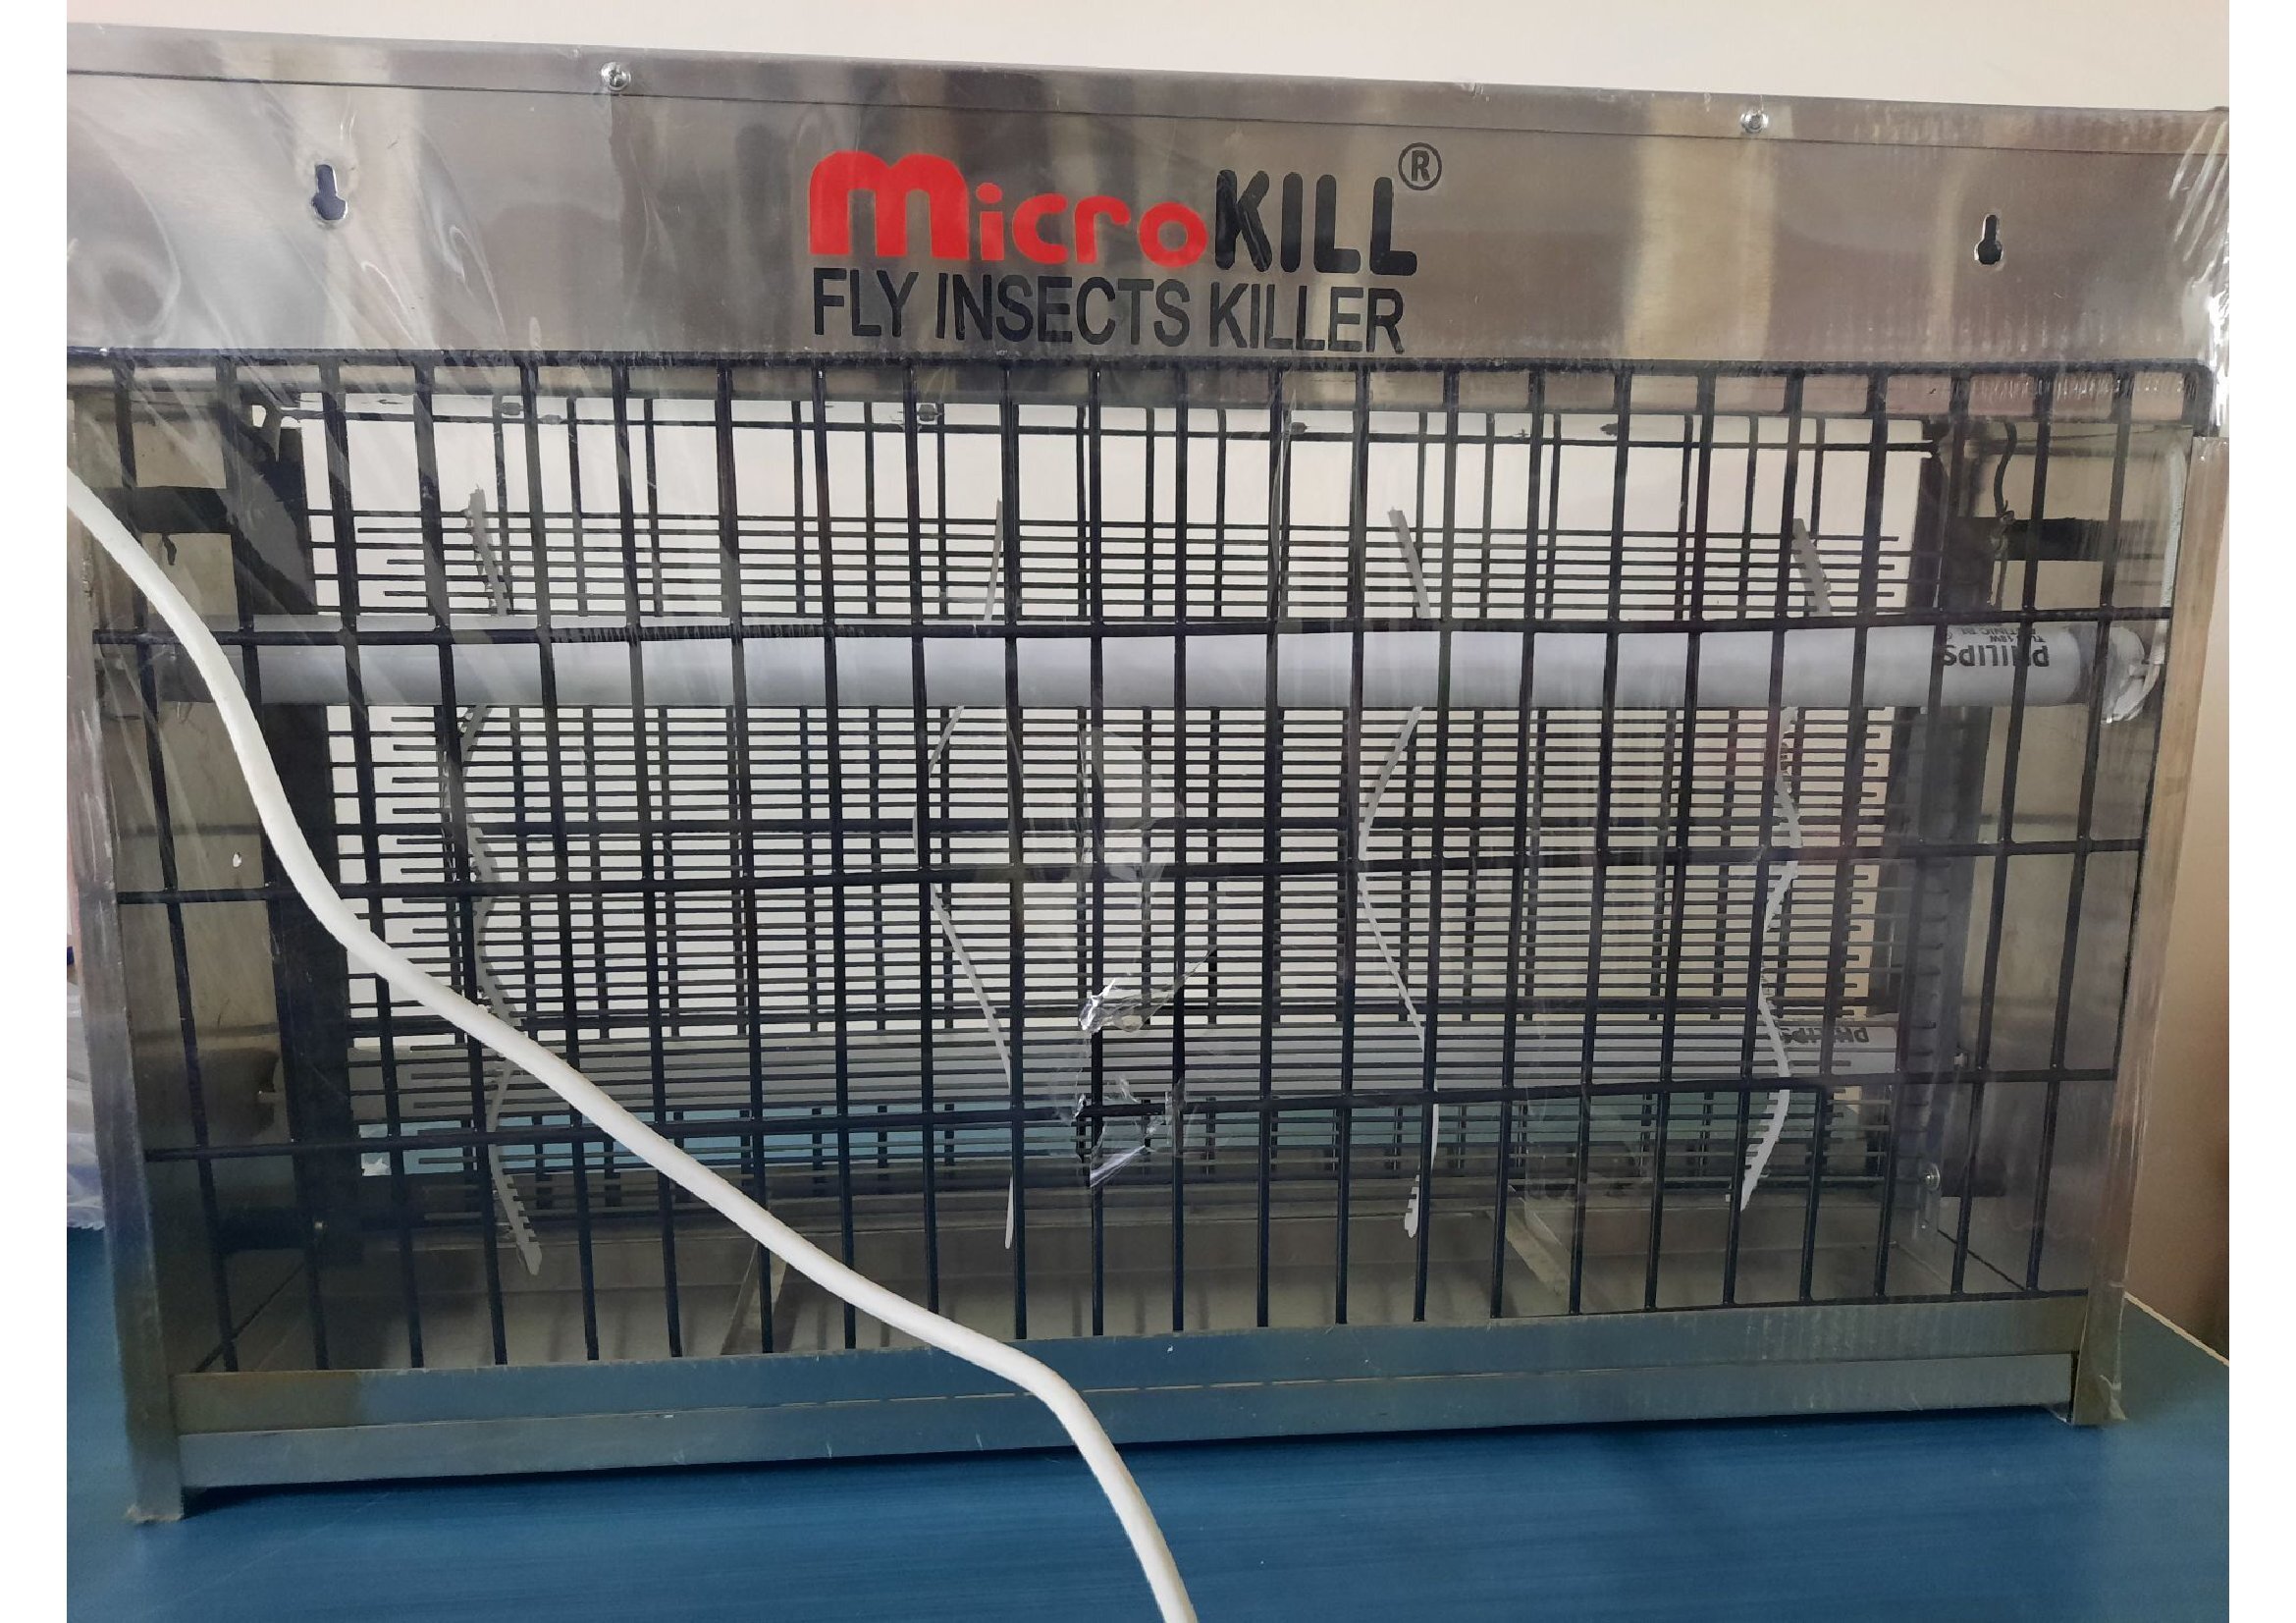 Microkill insect killer machine S.S. - 2 feet